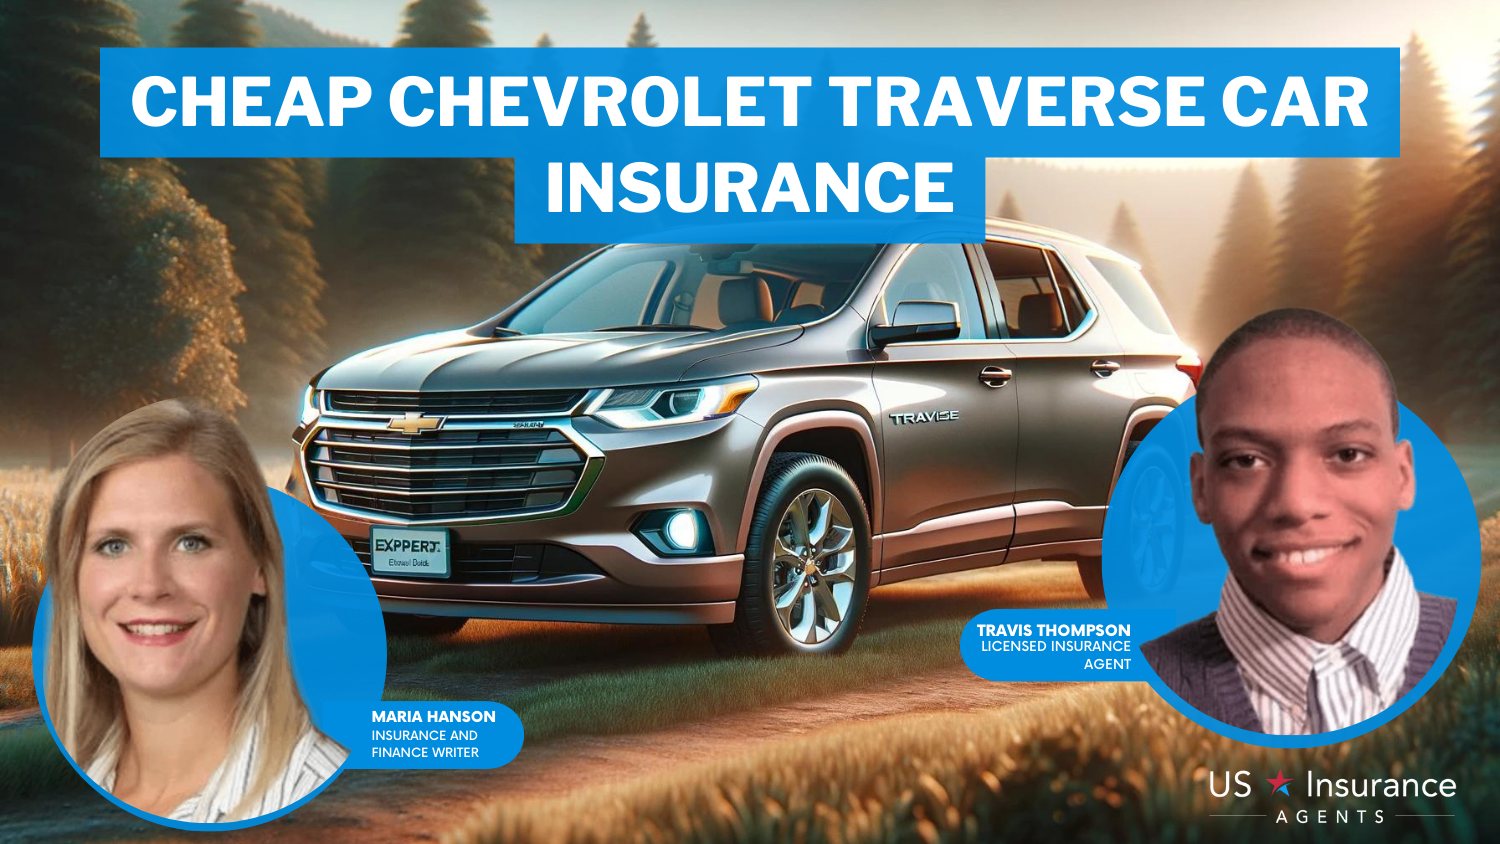 State Farm, Erie, and American Family: Cheap Chevrolet Traverse Car Insurance